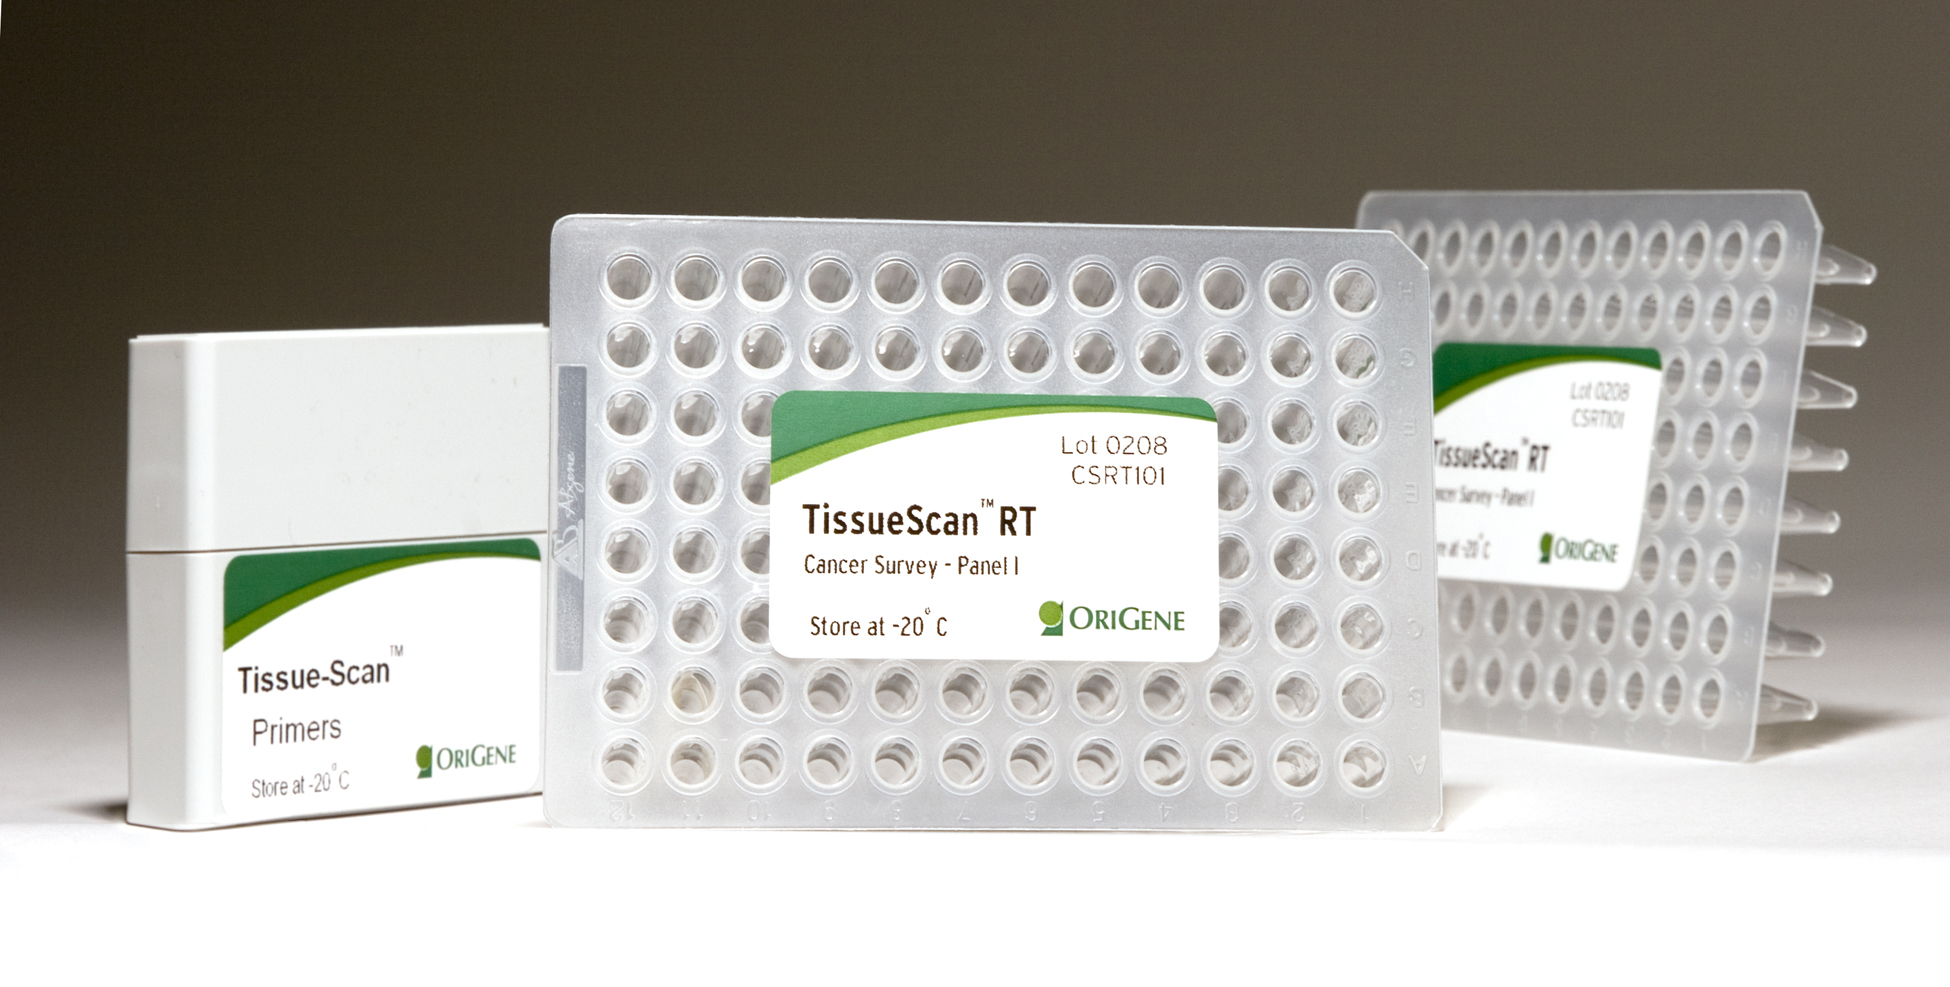 TissueScan product image.